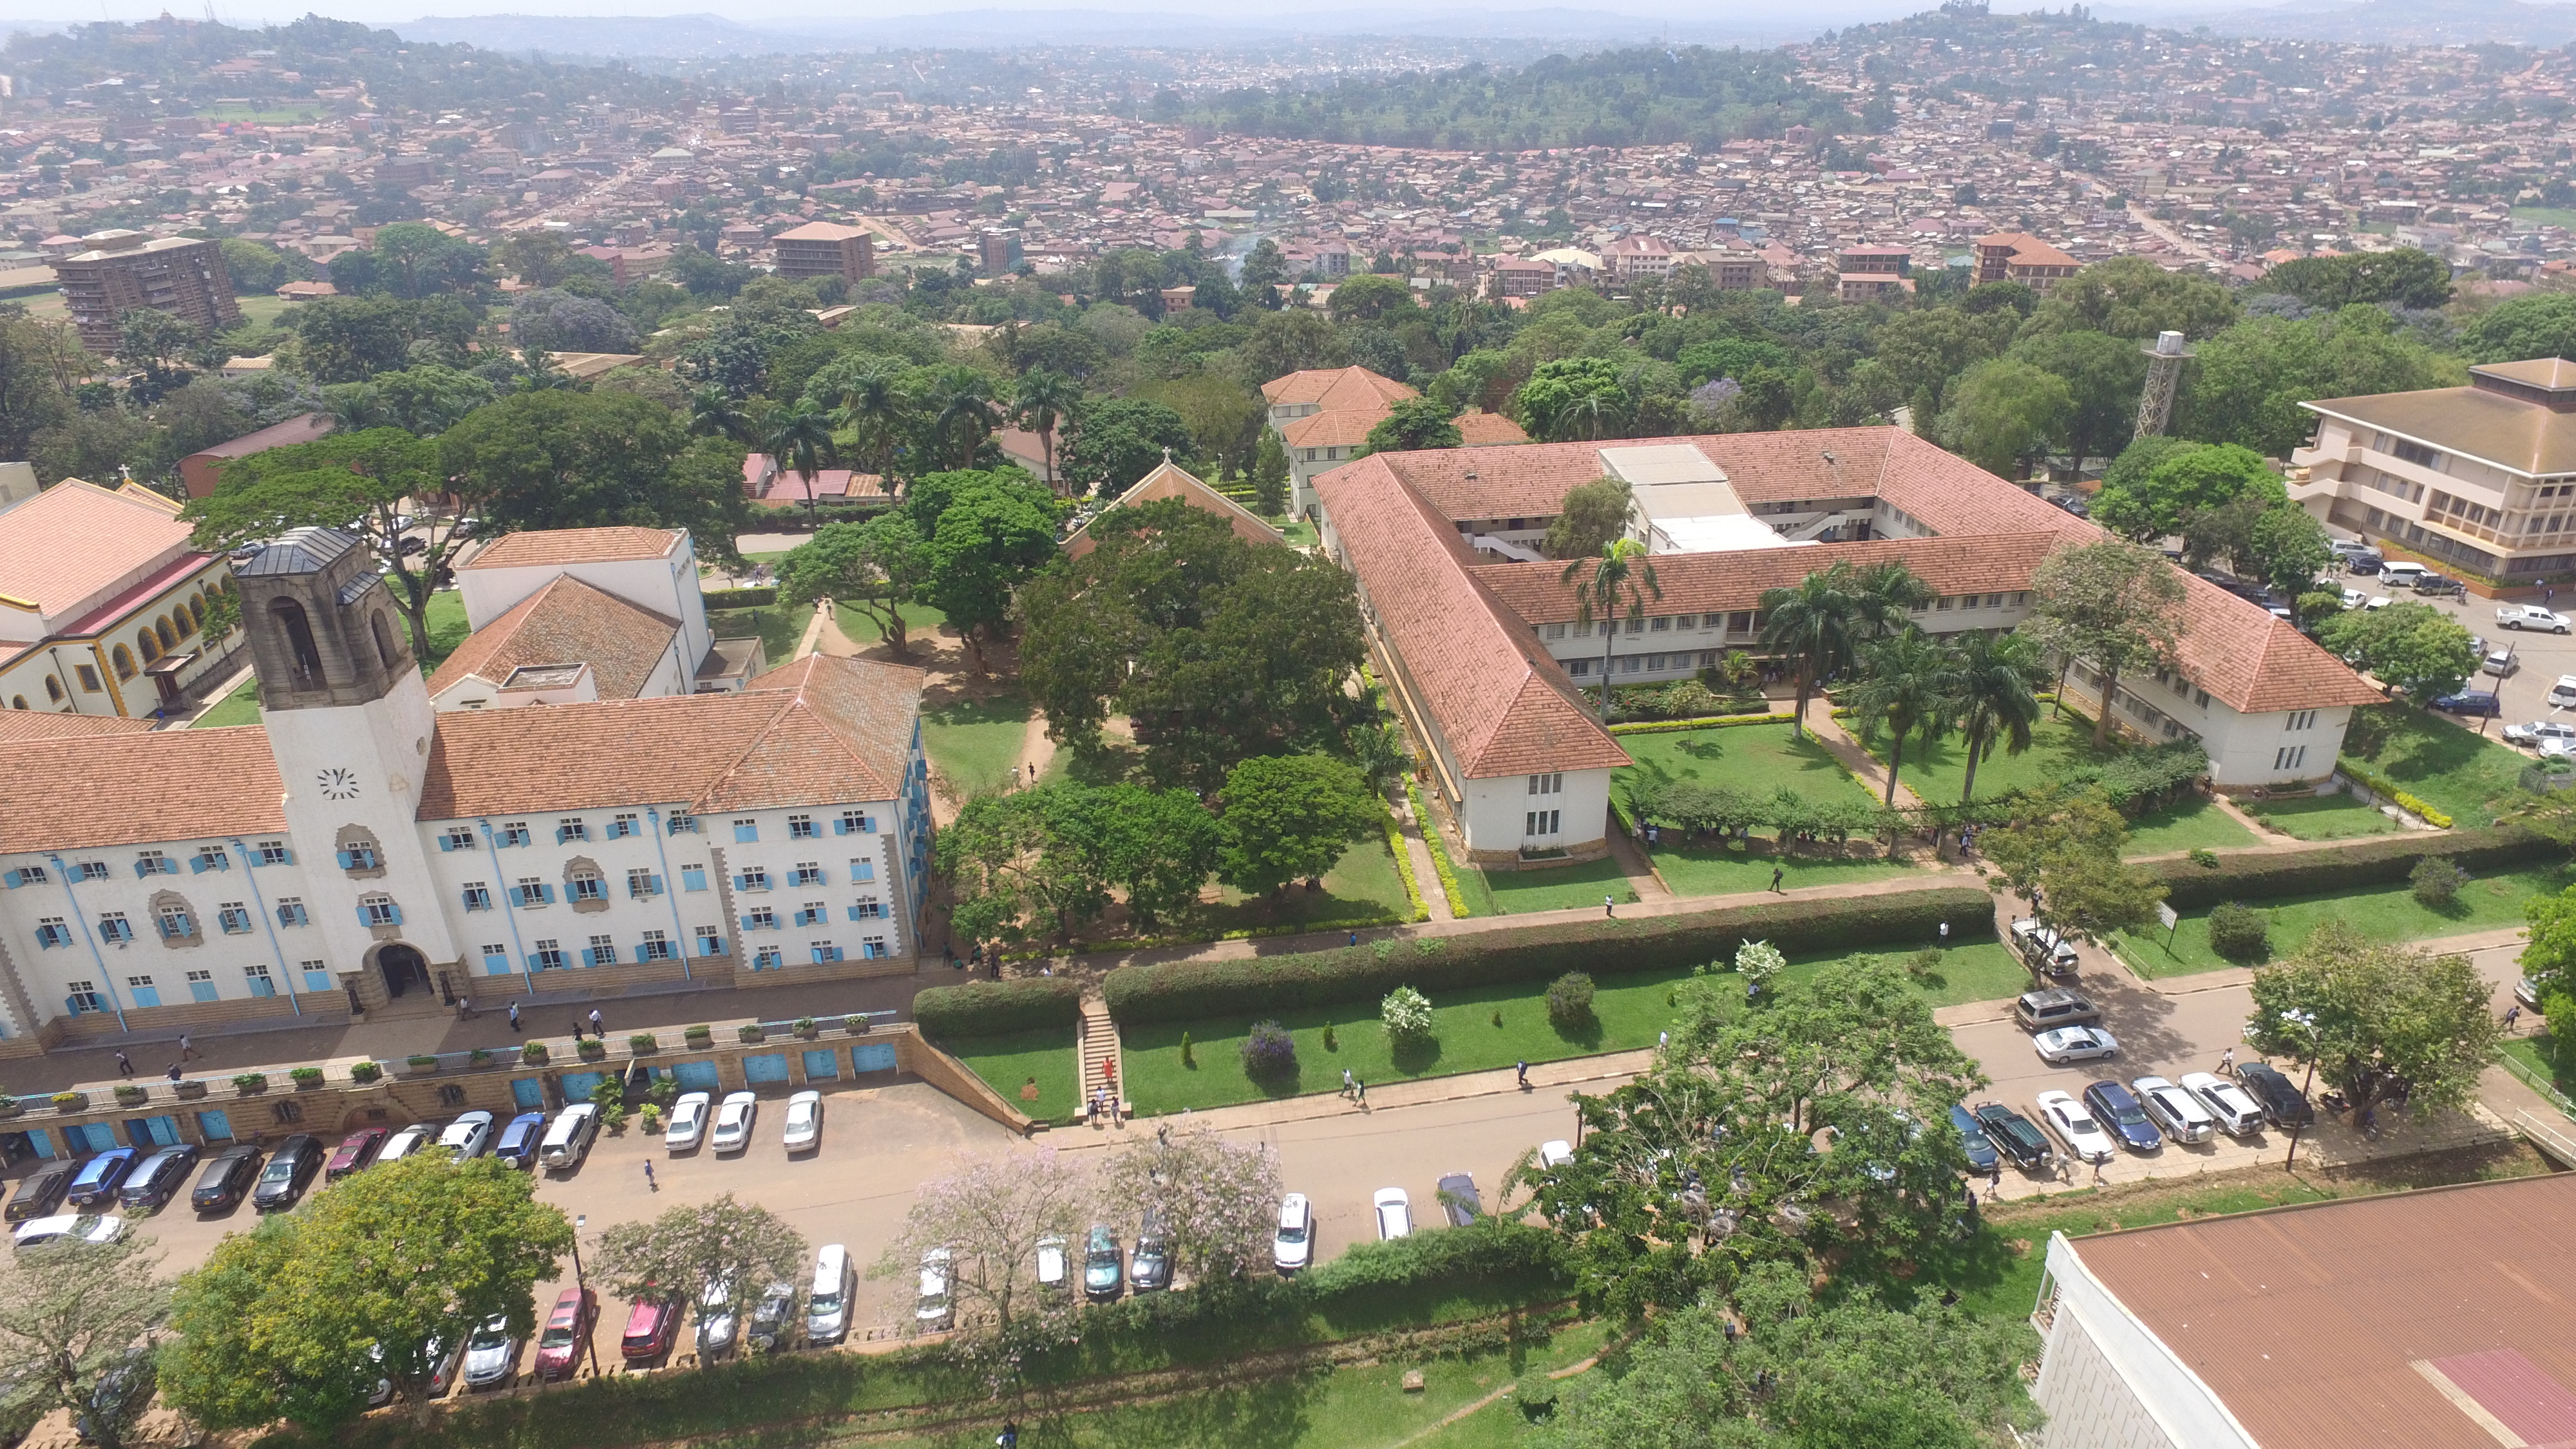 Did you know that you can actually attend lectures at Makerere University for free and pay letar towards exams?